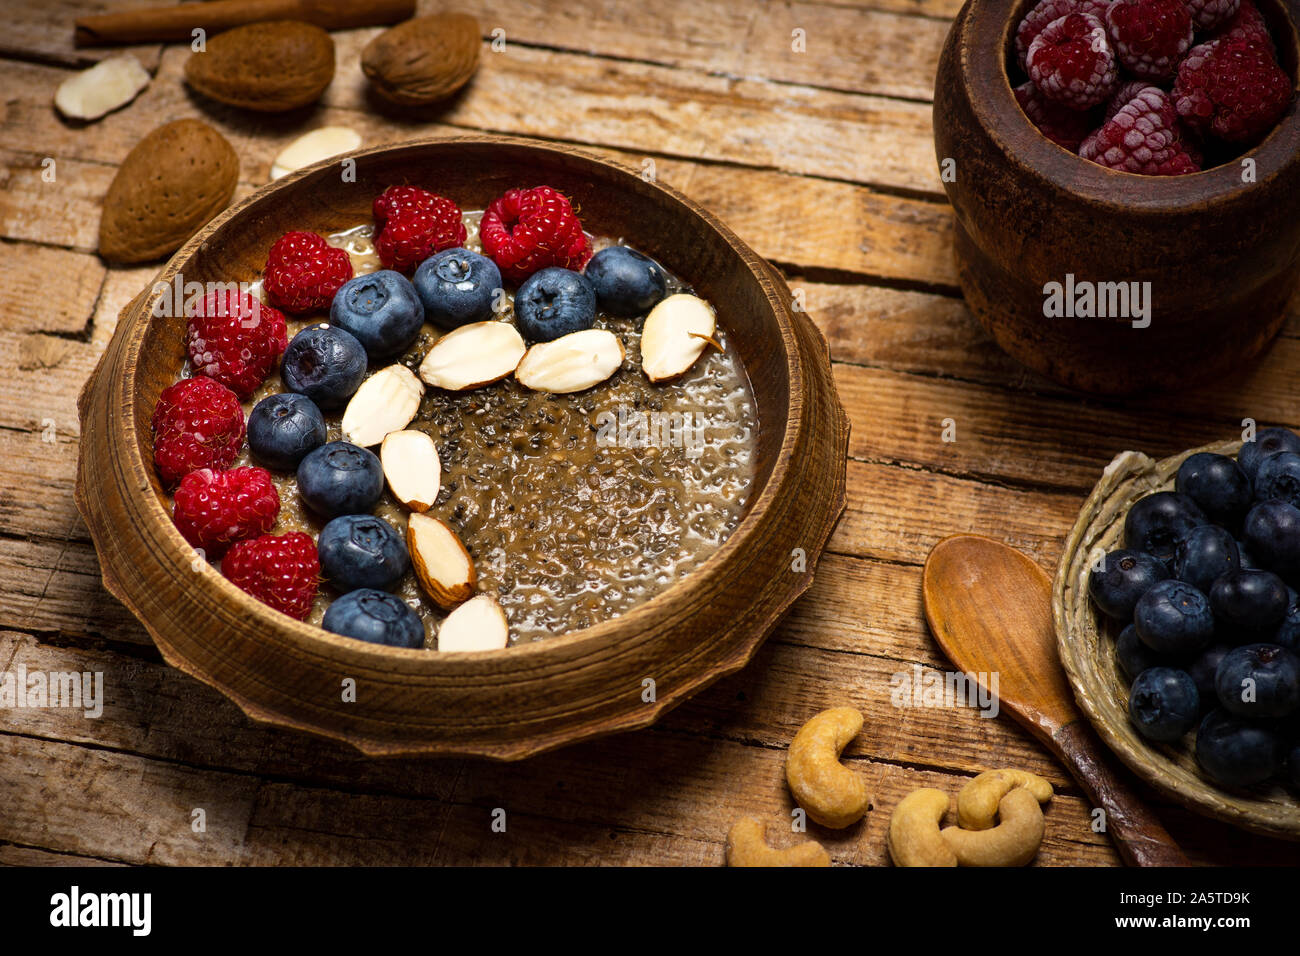 Chia seed healthy porridge with berry fruits for a healthy meal Stock Photo